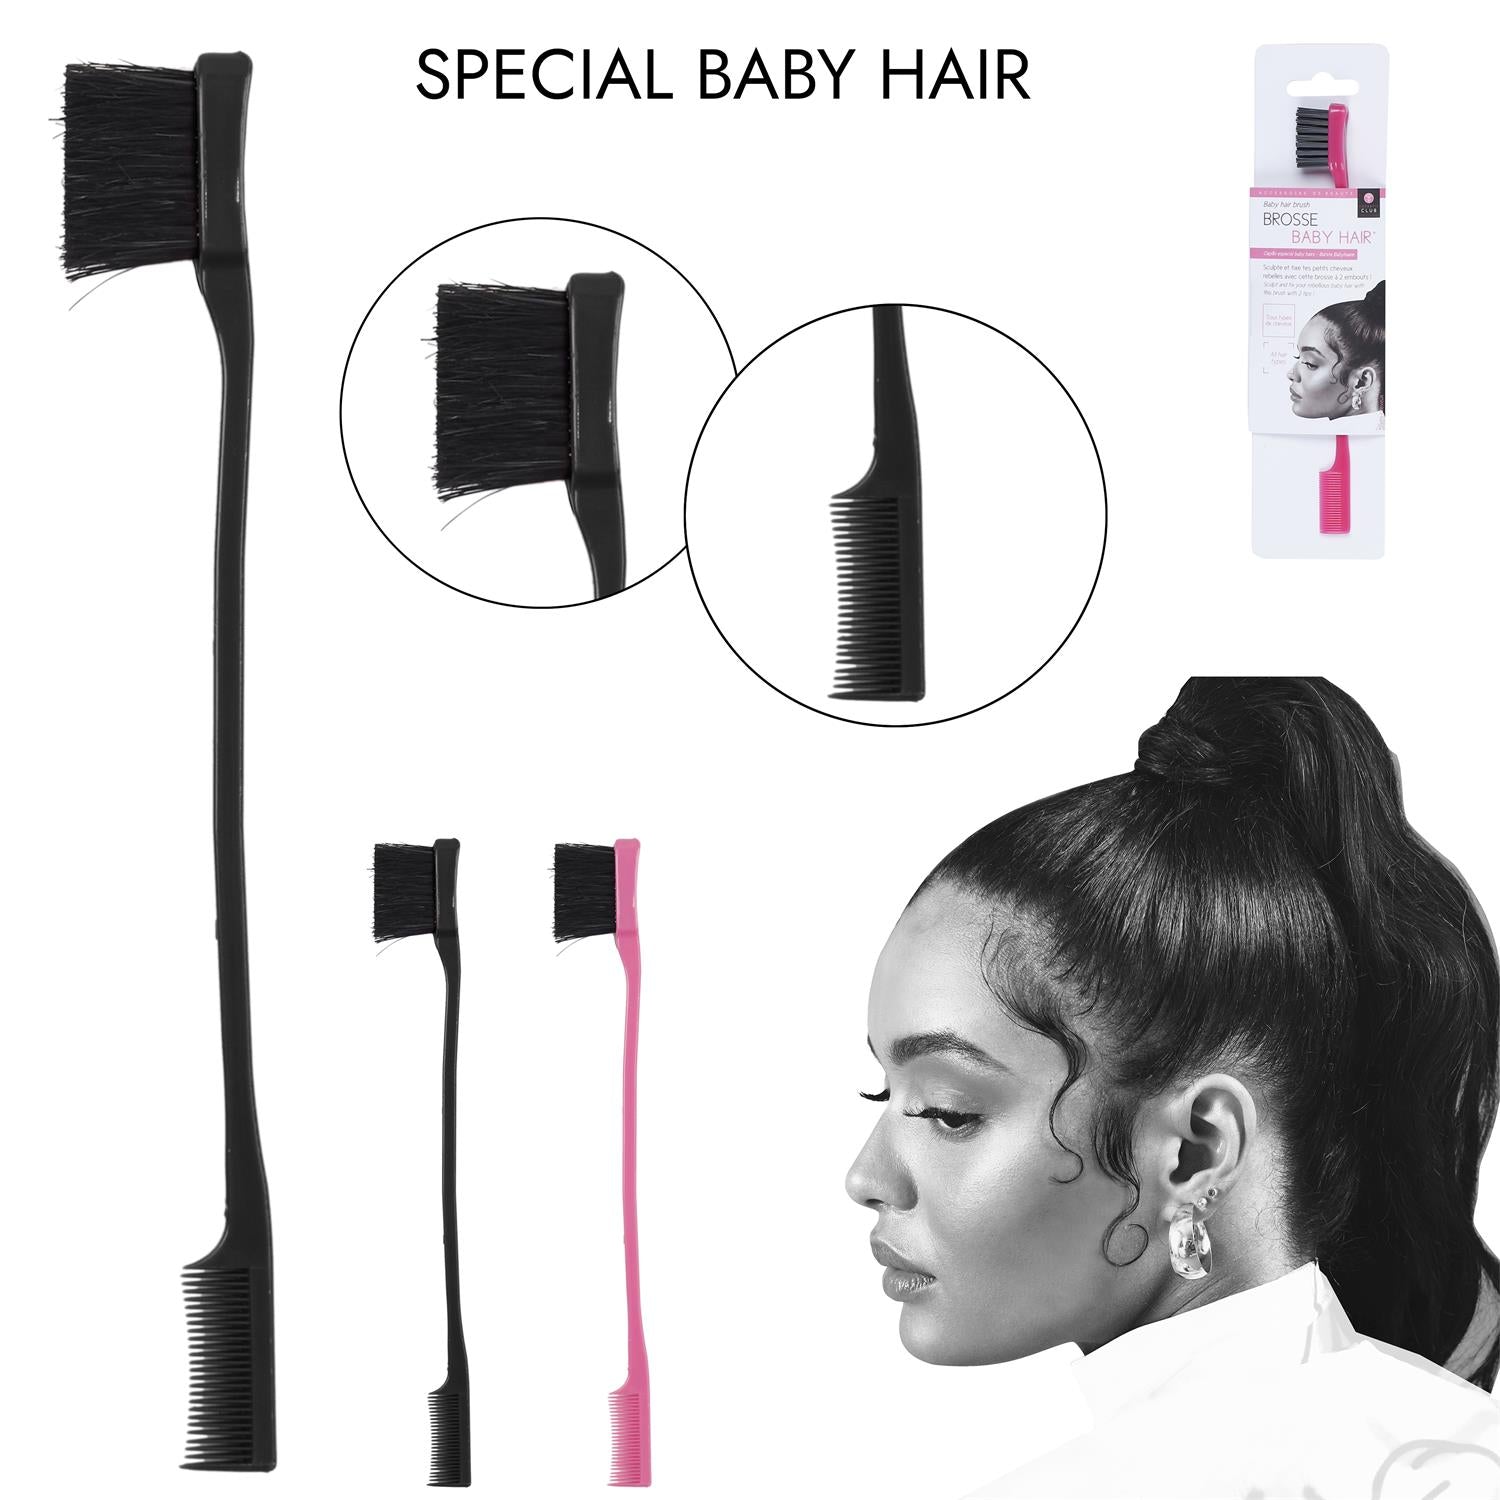 Brosse baby hair – Funso shop